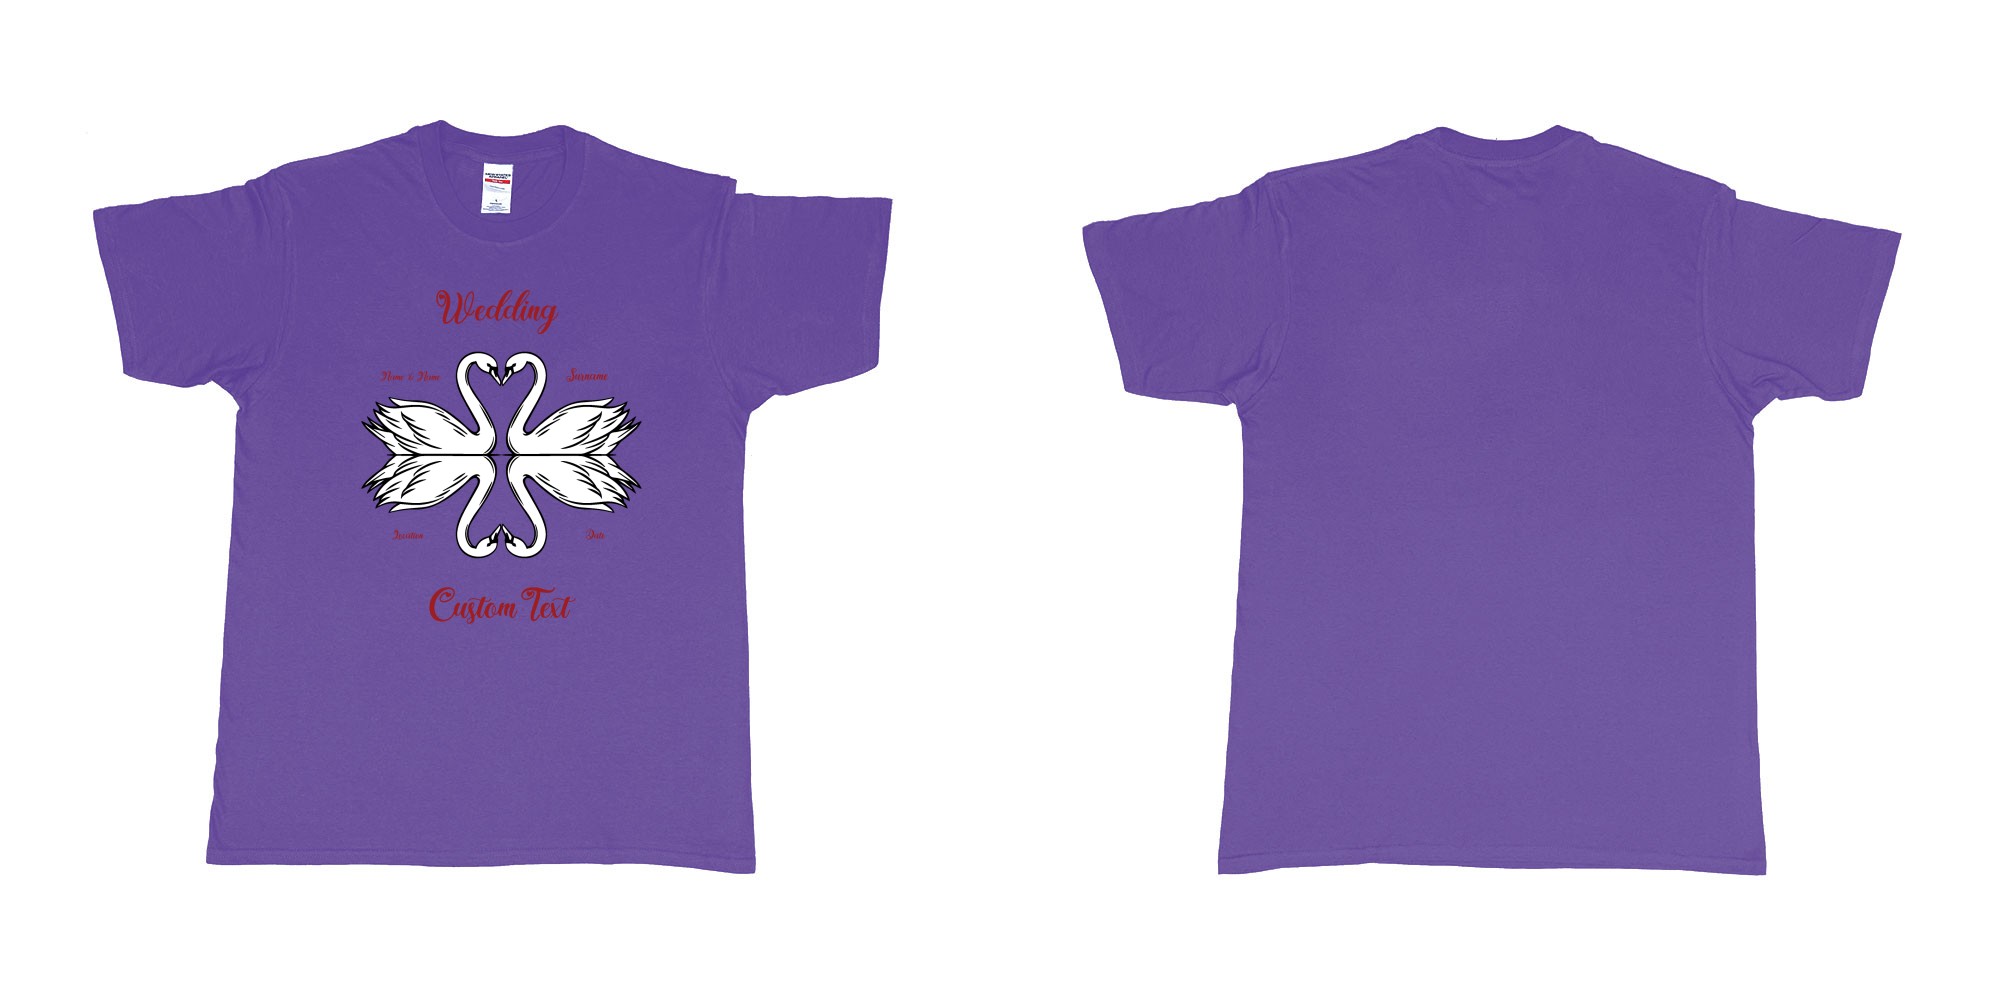 Custom tshirt design swans hearts reflection in fabric color purple choice your own text made in Bali by The Pirate Way